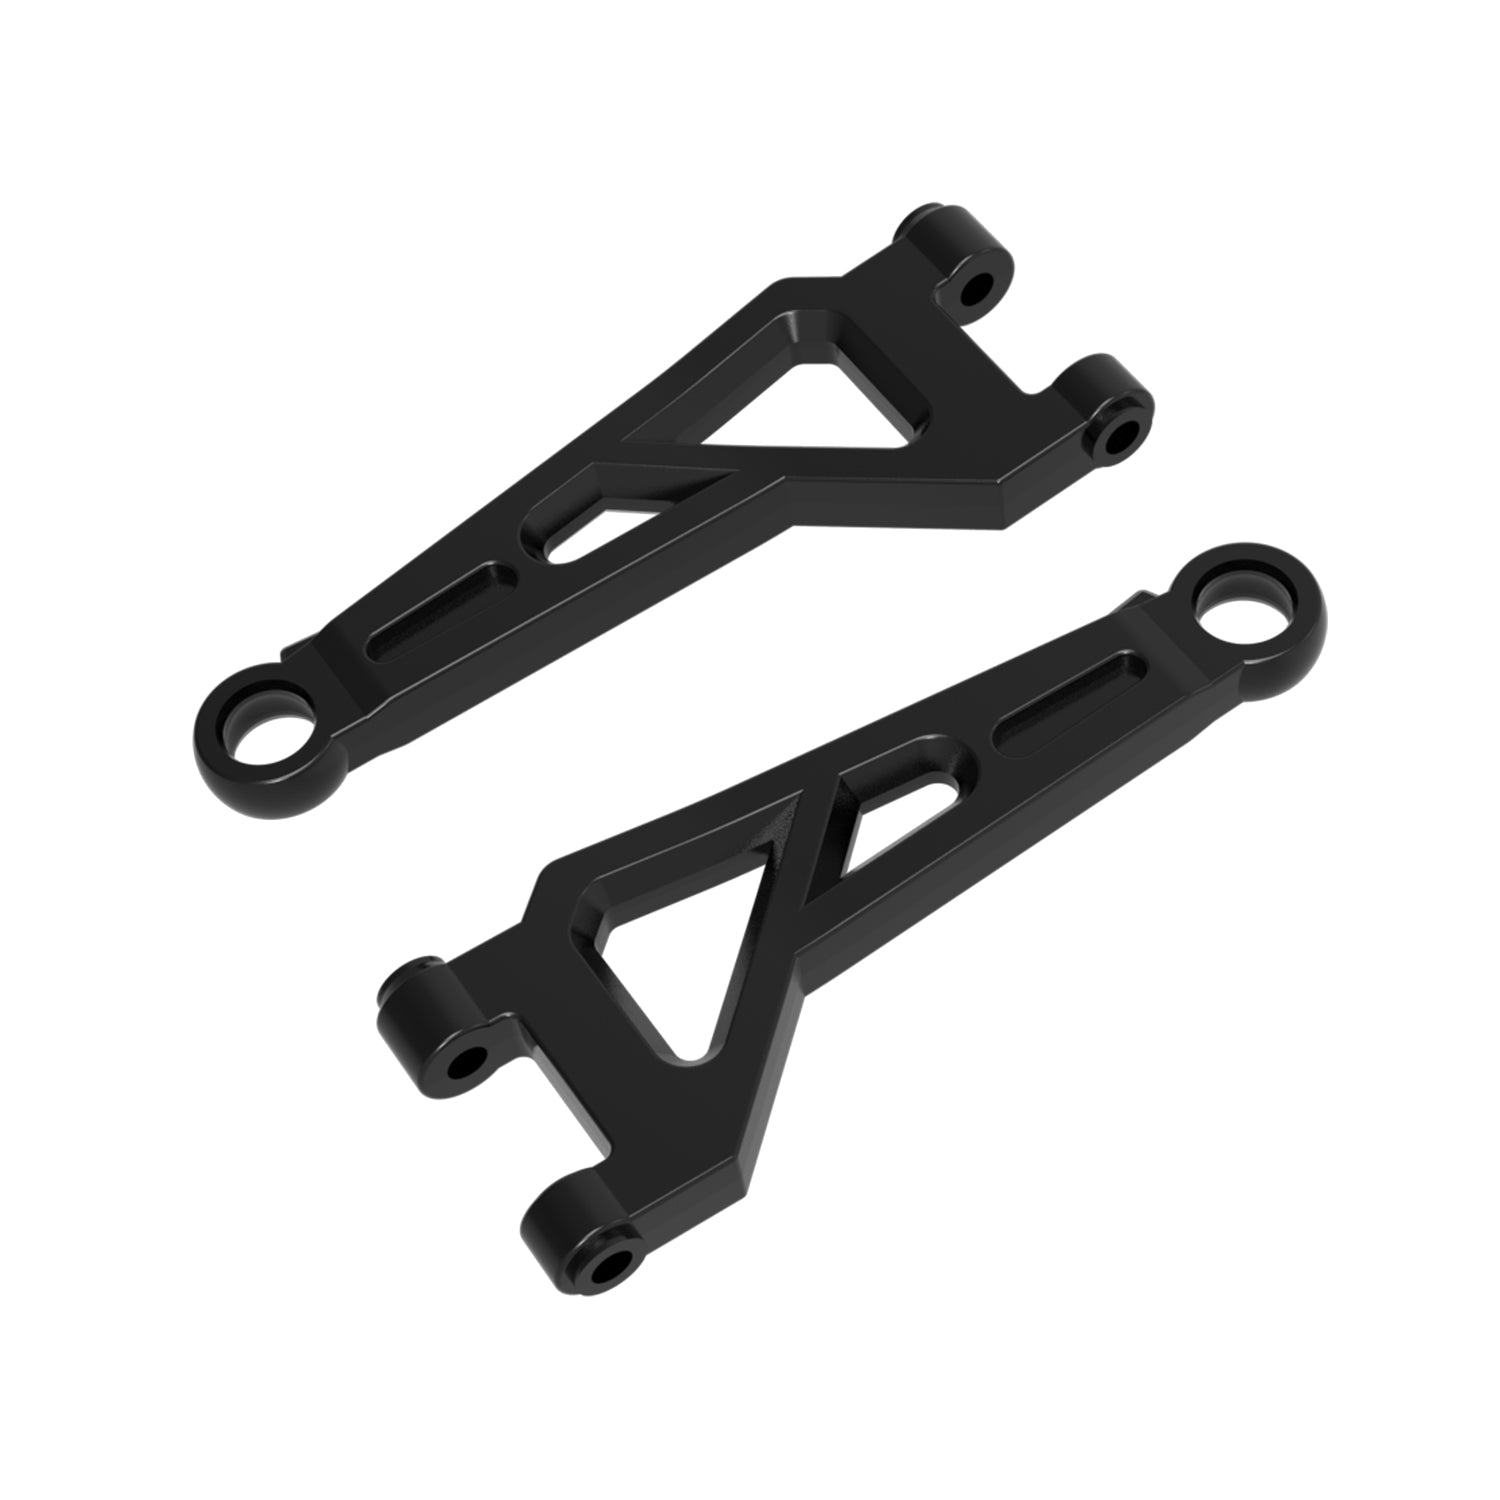 1 set of Suspension Arms (Left & Right) for 1/16 Remote Control Truck Crossy / Sand Storm / Tornado